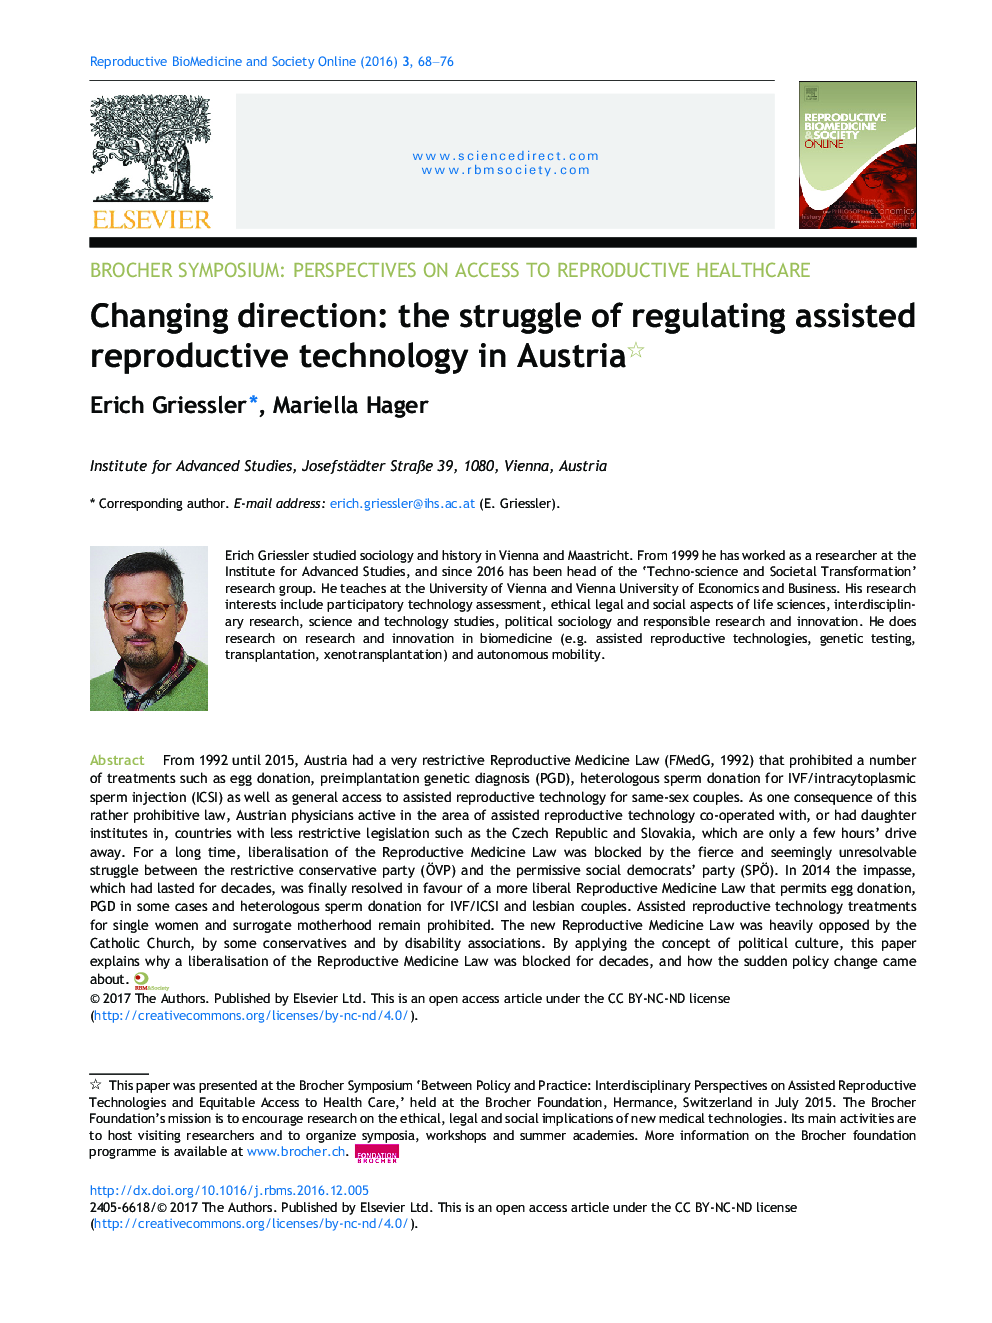 Changing direction: the struggle of regulating assisted reproductive technology in Austria